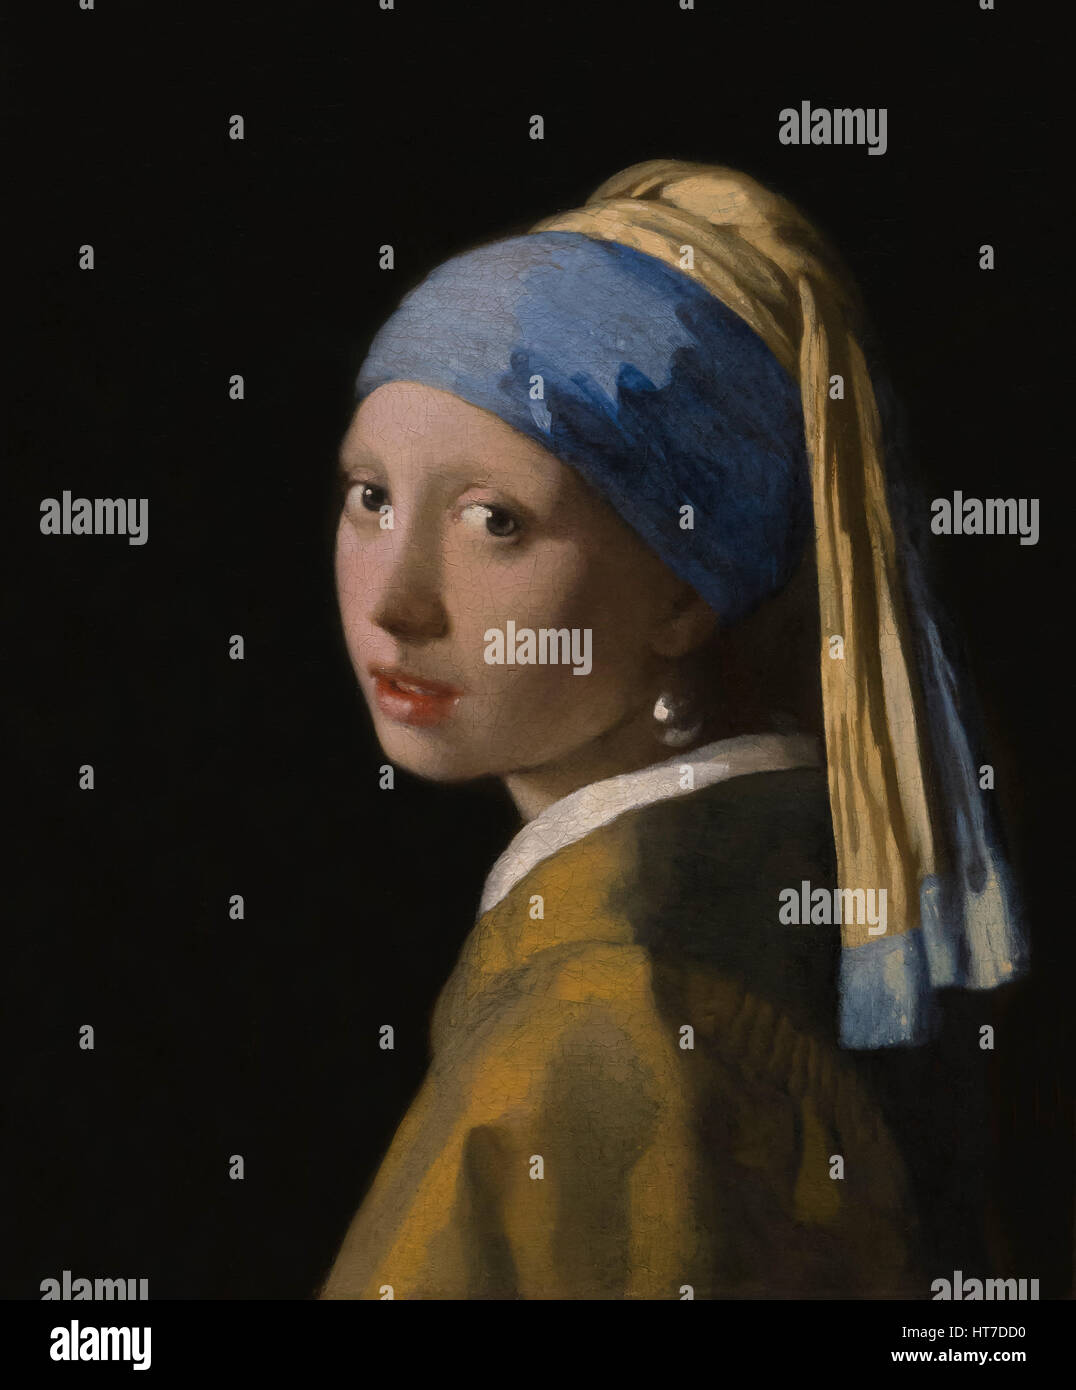 Girl with a Pearl Earring, by Johannes Vermeer, circa 1665, Royal Art Gallery, Mauritshuis Museum, The Hague, Netherlands, Europe Stock Photo